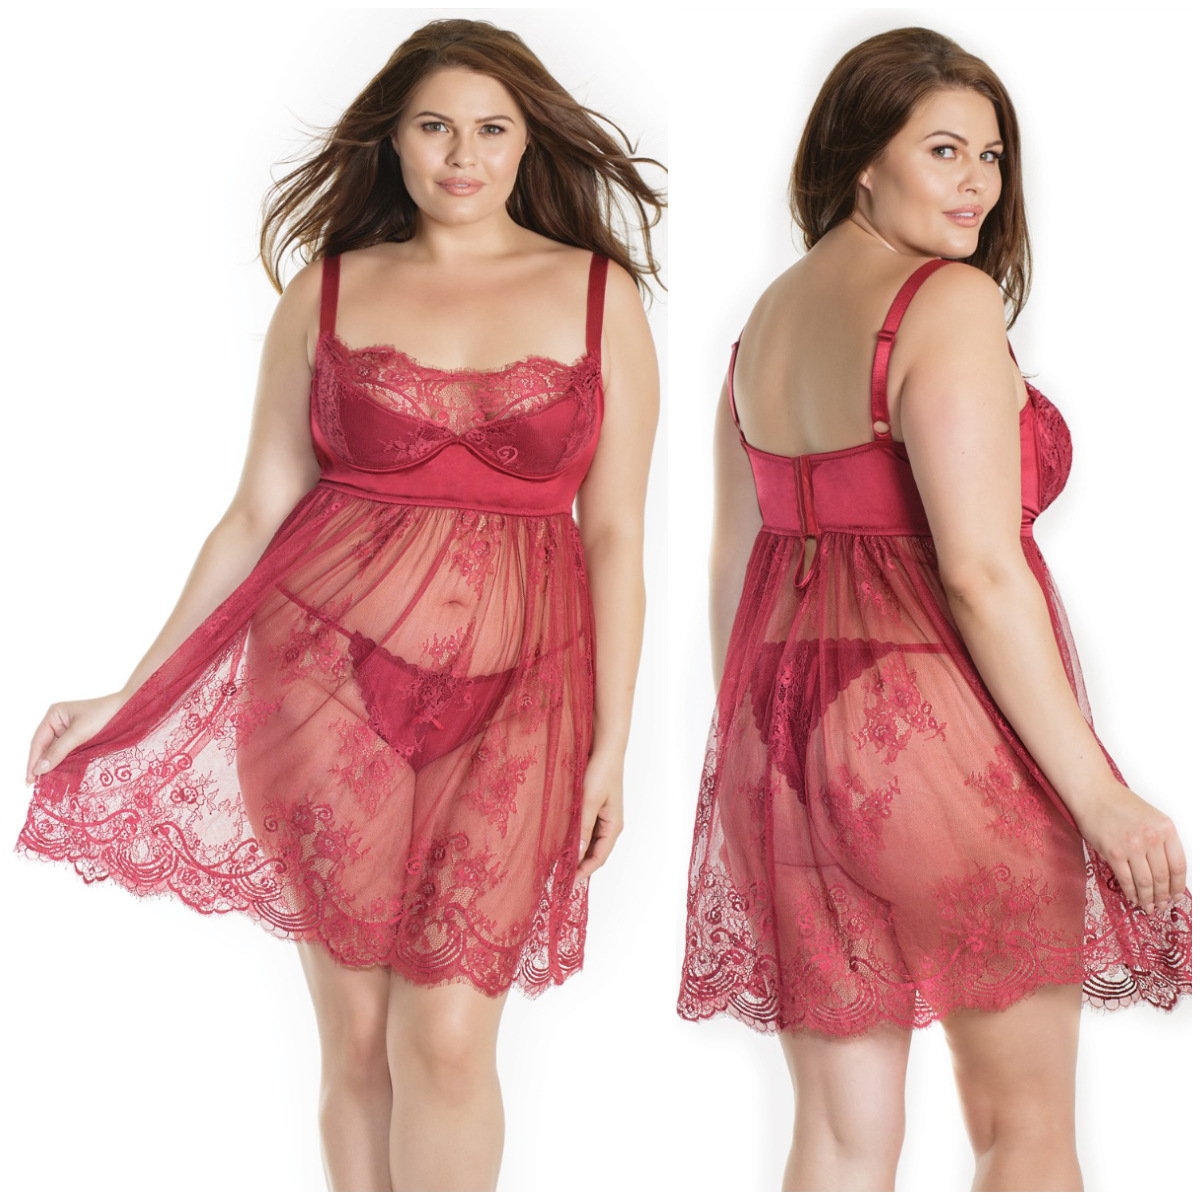 Babydoll et String - 7202X - Grande Taille - Coquette